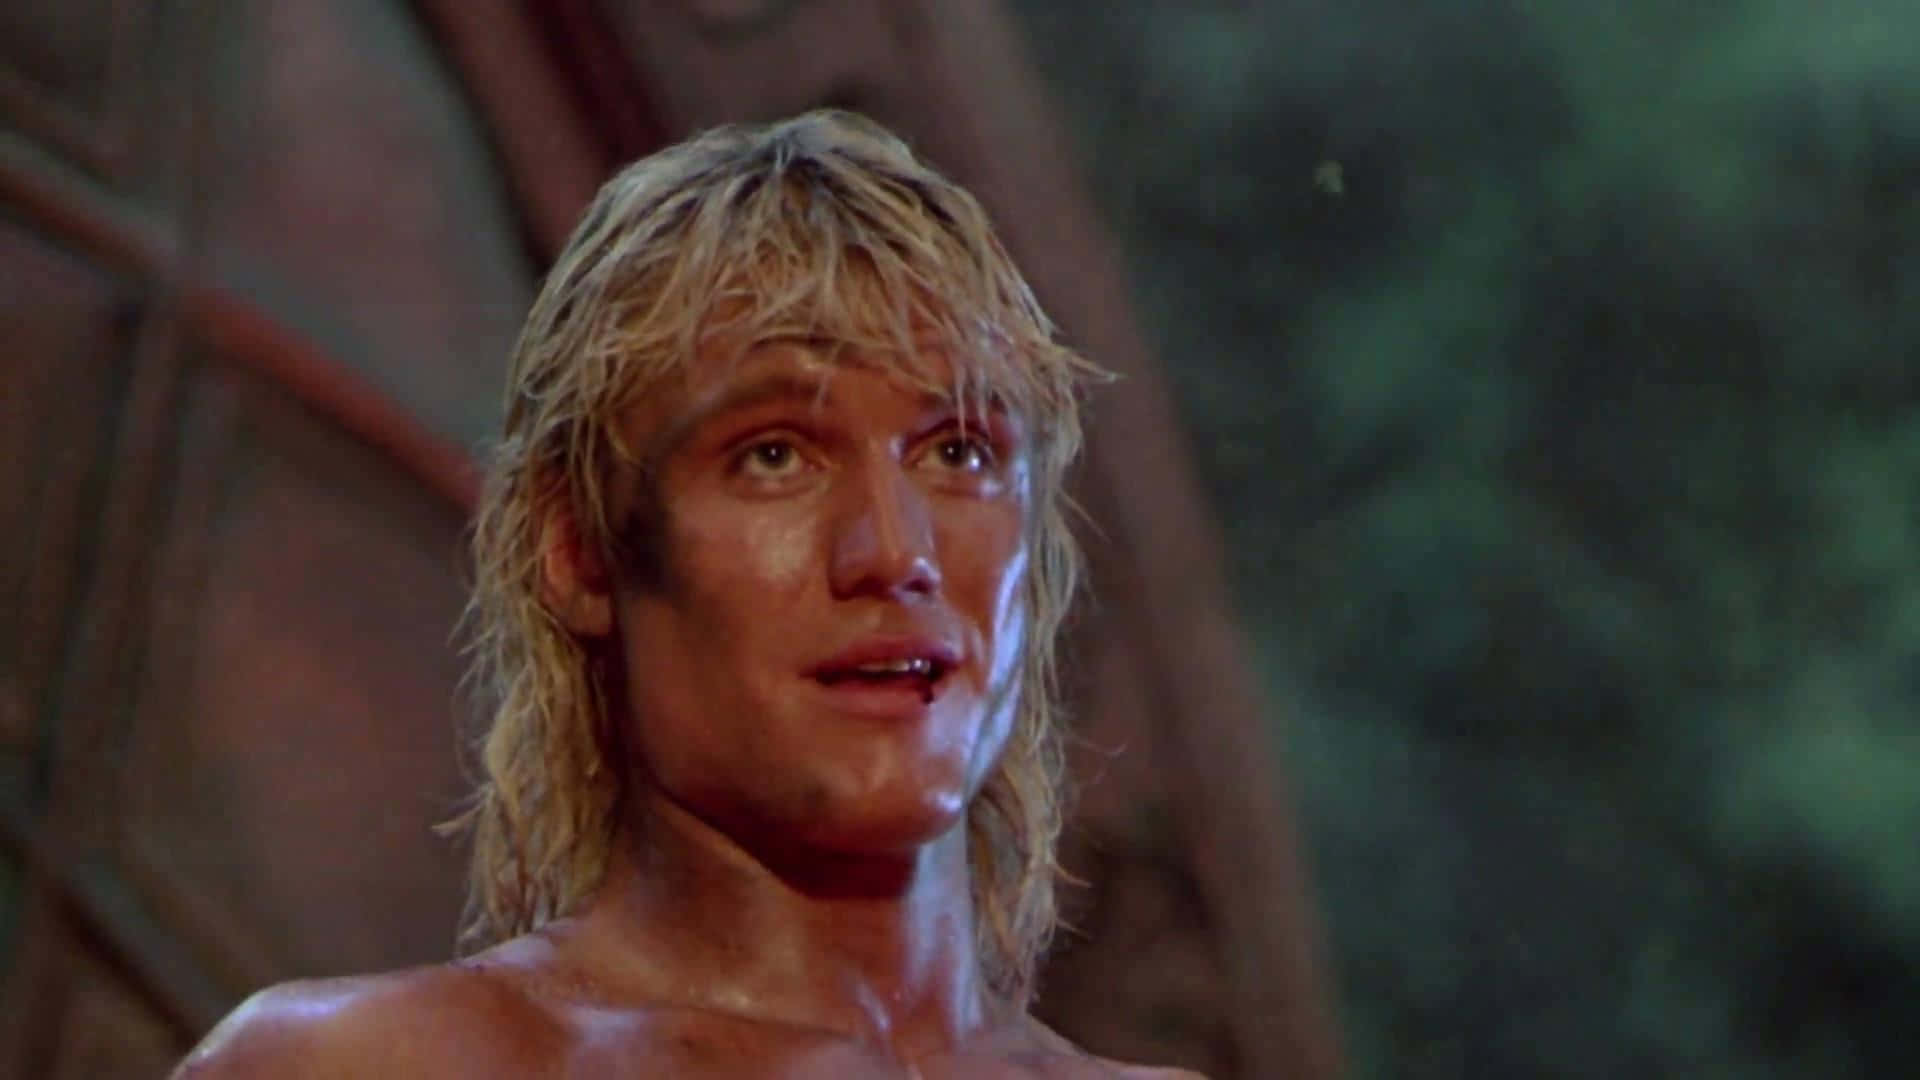 Dolph Lundgren, an icon in the action movie genre. Wallpaper